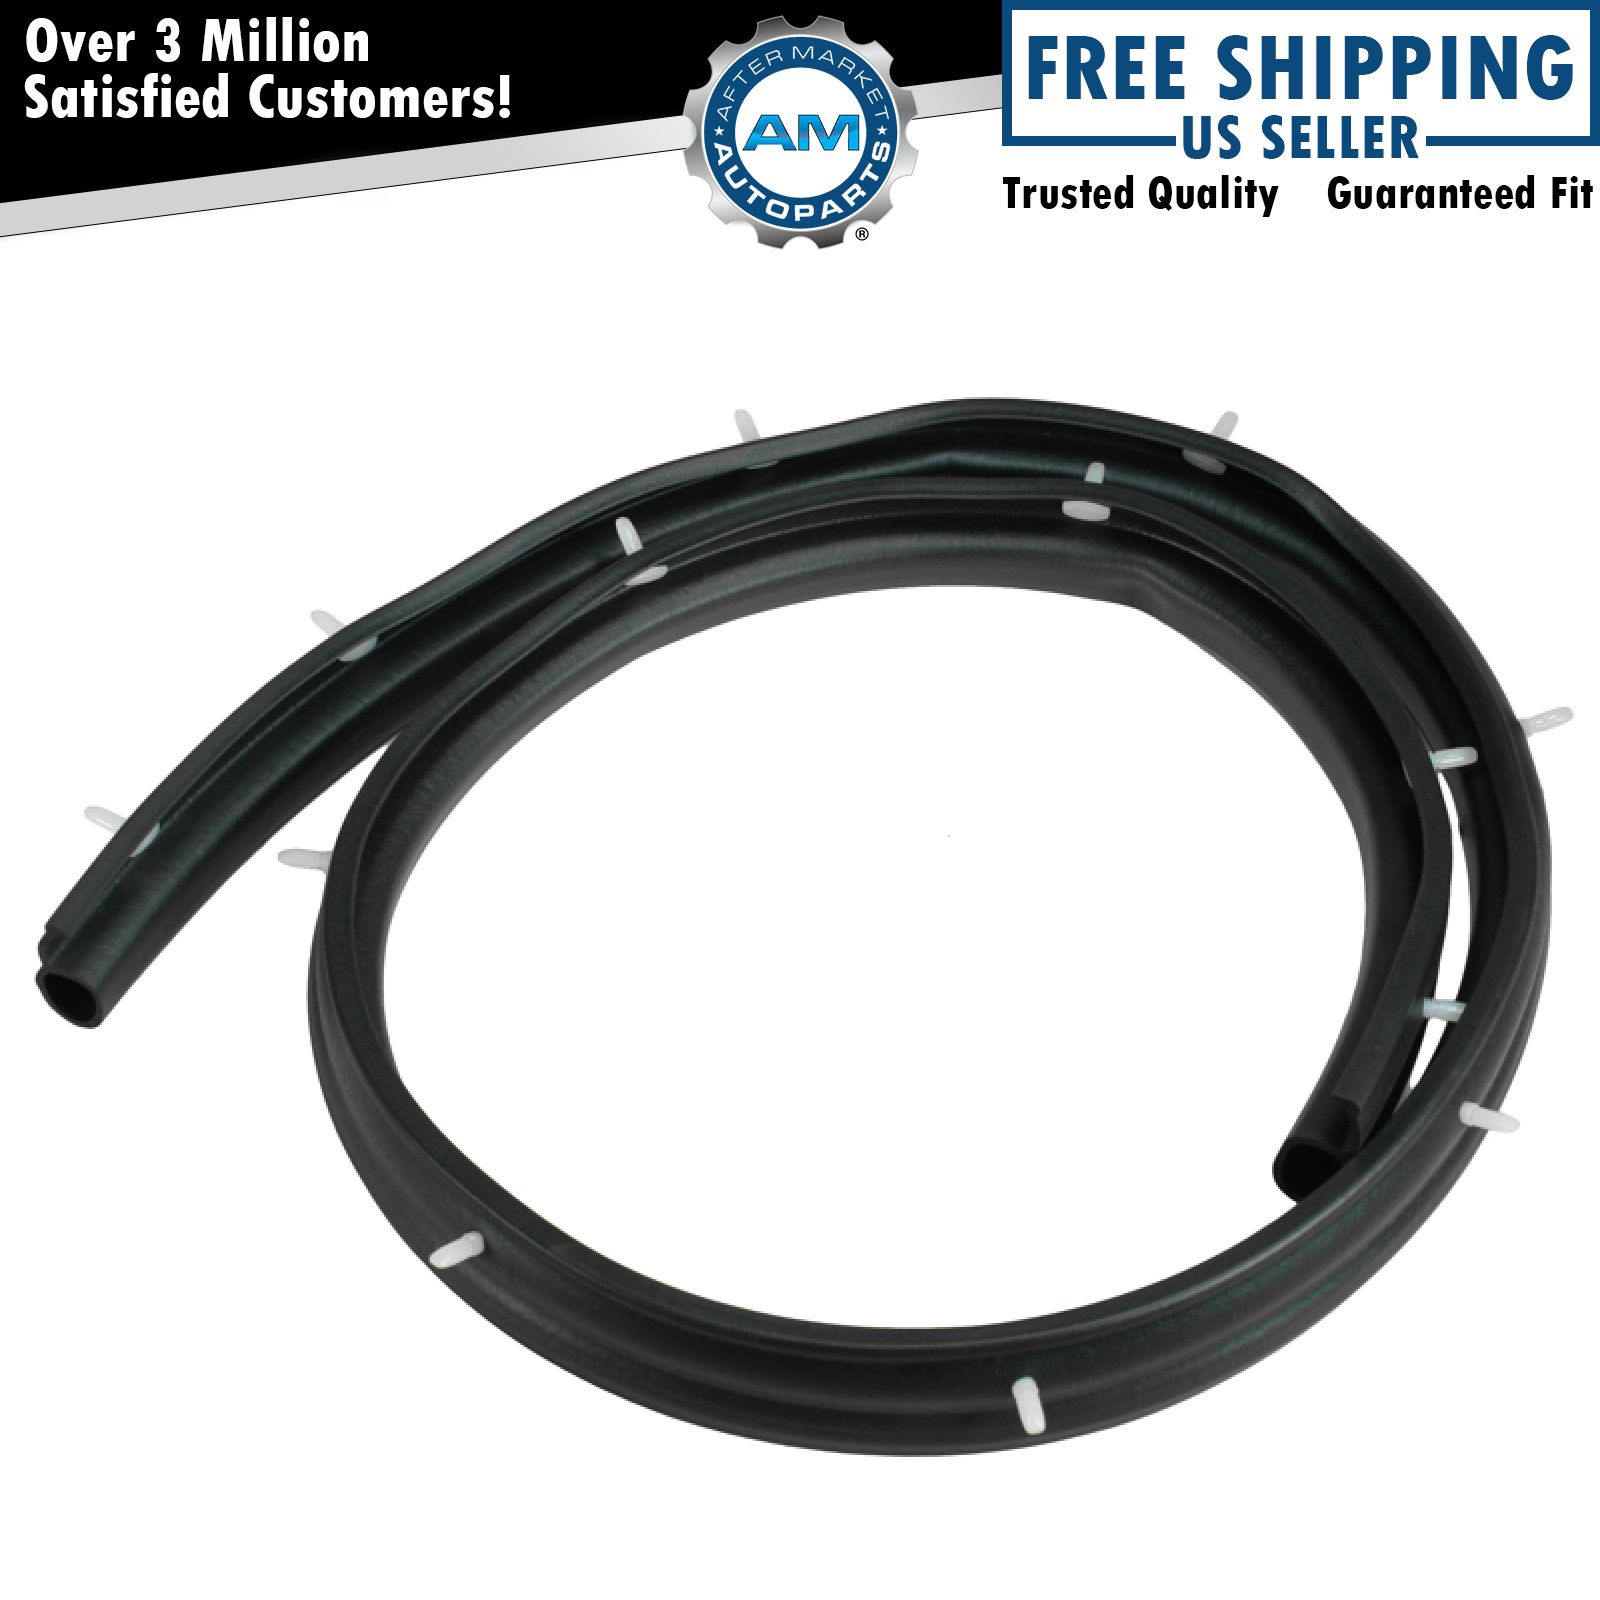 Hood to Cowl Rubber Weatherstrip Seal for Chevy GMC Blazer C/K Pickup Truck